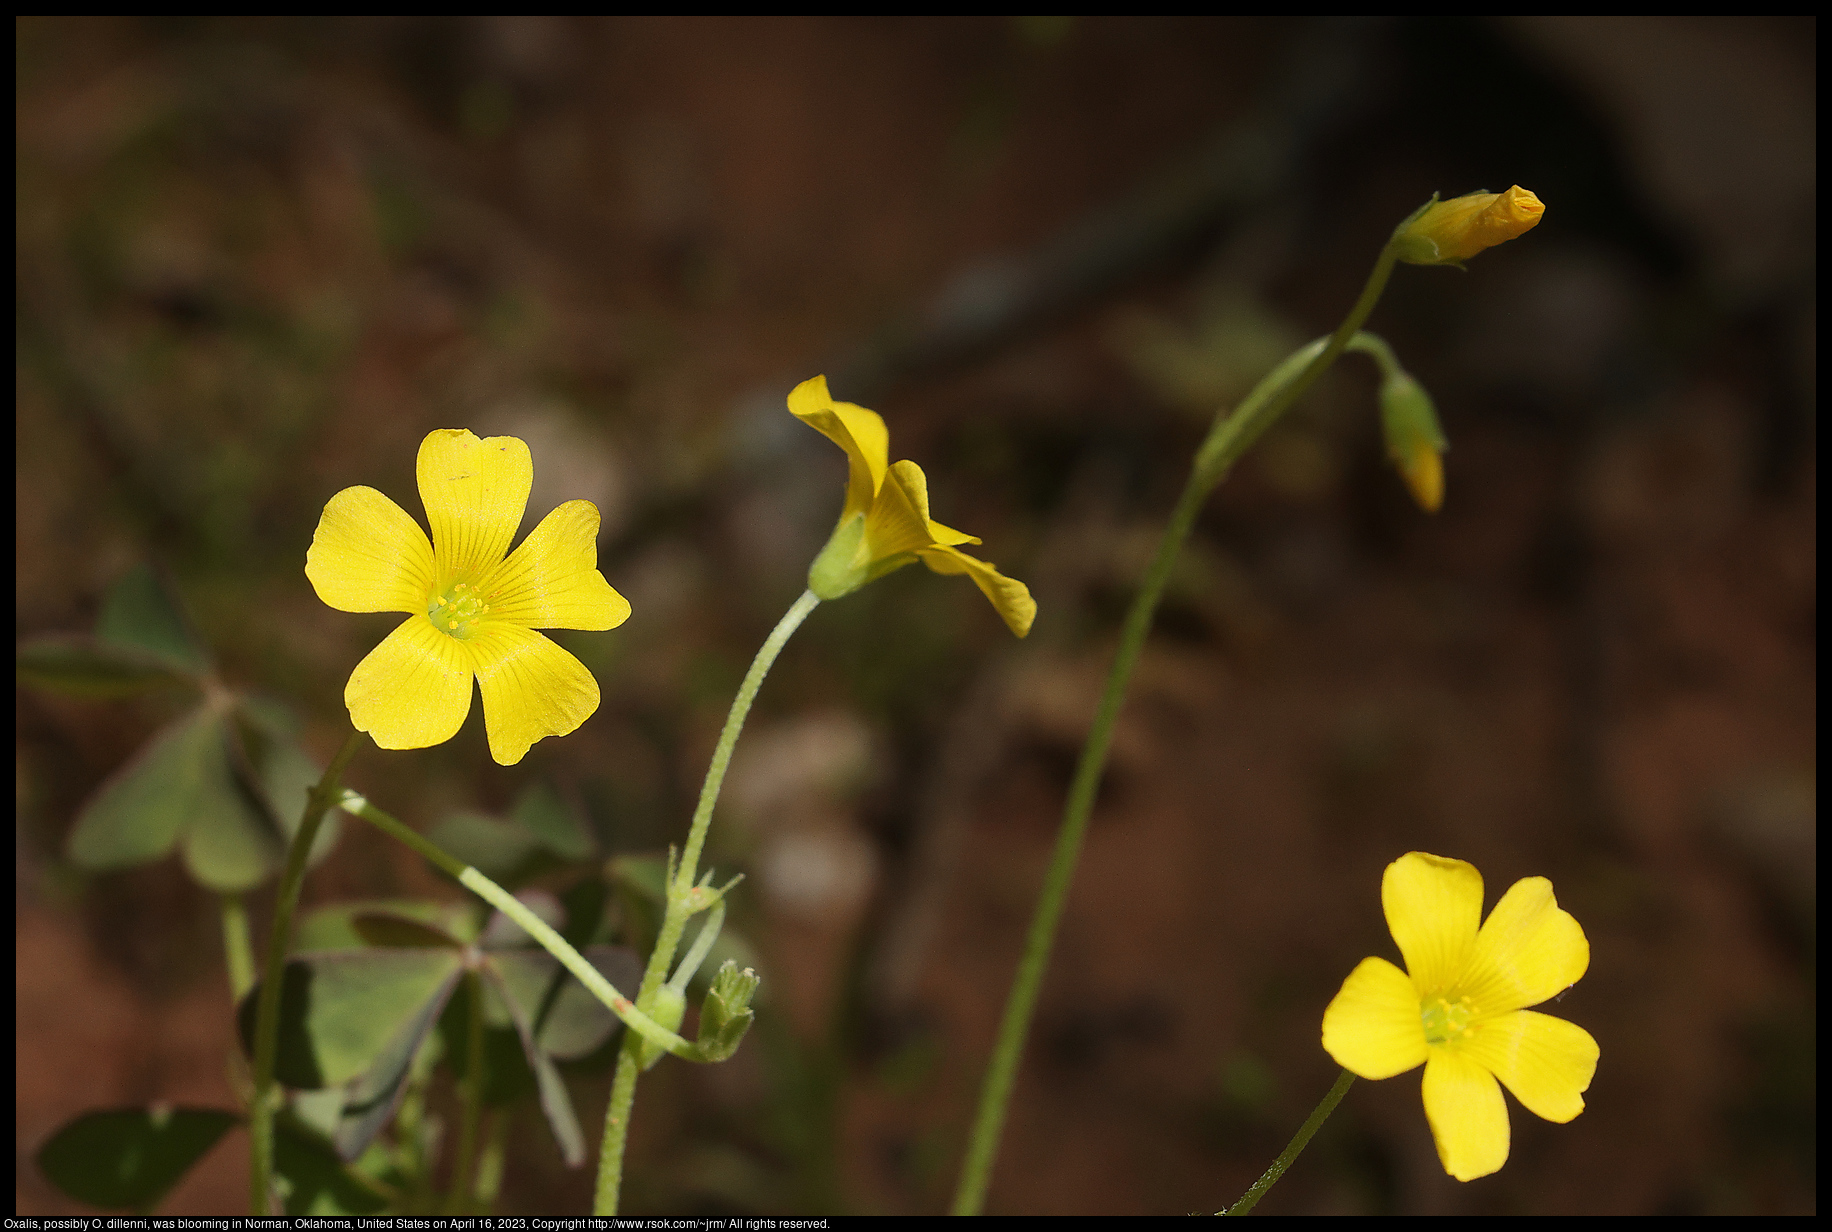 Oxalis, possibly O. dillenni, was blooming in Norman, Oklahoma, United States on April 16, 2023